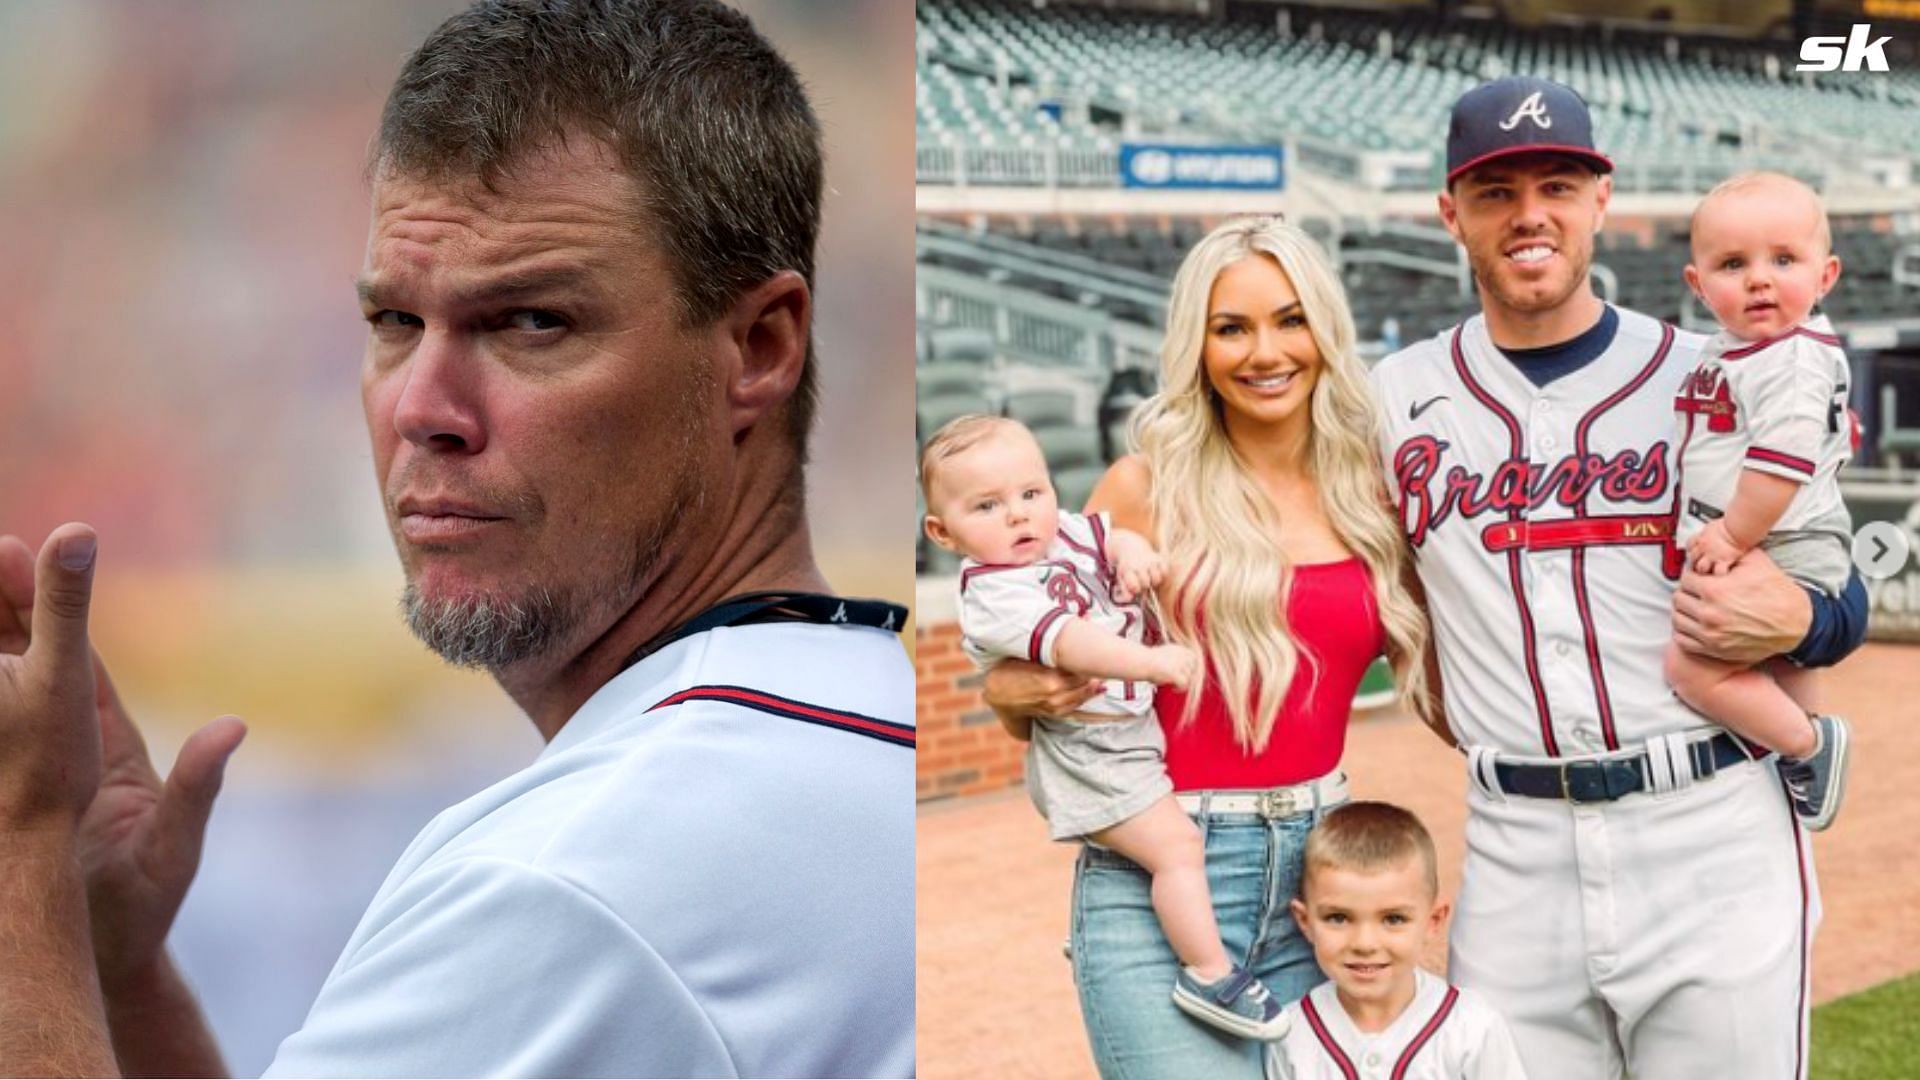 ATLANTA, GA - AUGUST 8: Former Braves player Chipper Jones participates in a pre-game ceremony honoring many Braves alumni players prior the game against the Washington Nationals at Turner Field on August 8, 2014 in Atlanta, Georgia. (Photo by Kevin Liles/Getty Images); Freddie Freeman with his wife, Chelsea Freeman and children. 